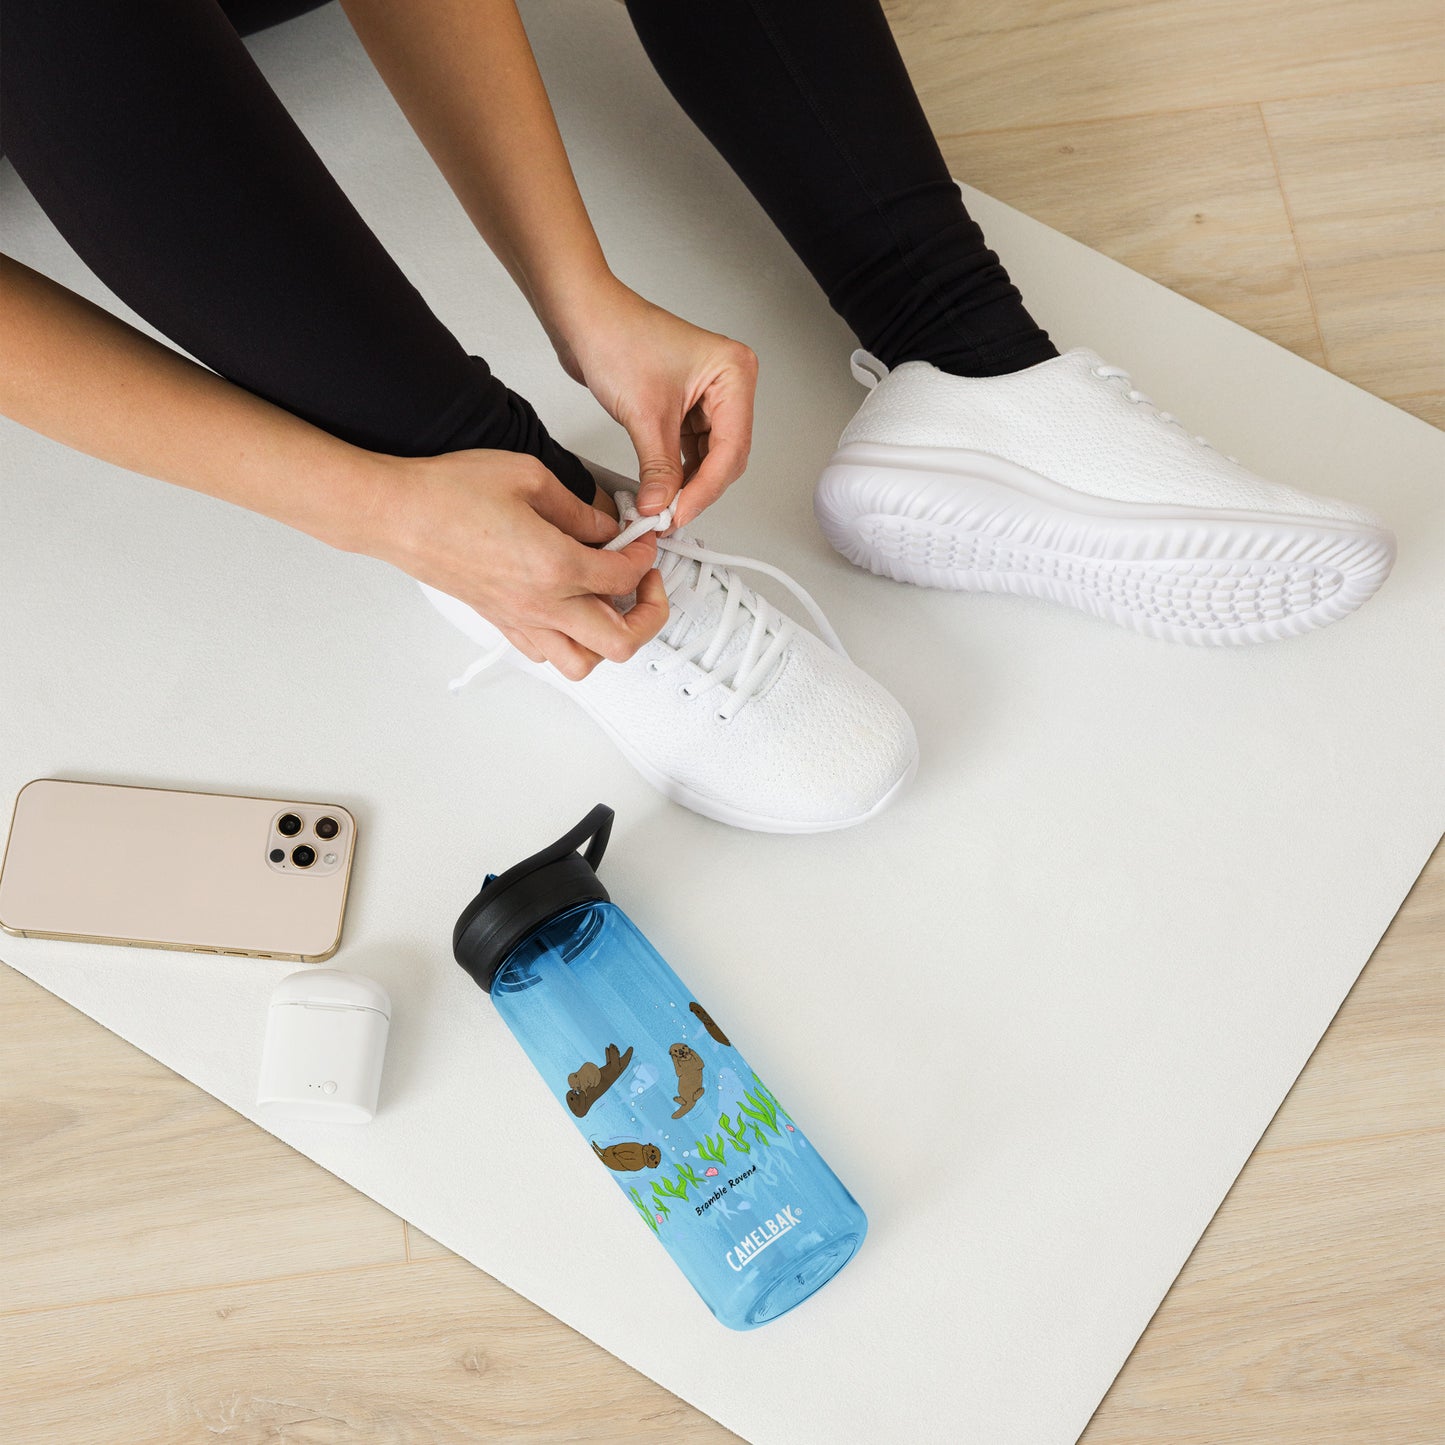 25 ounce sports water bottle with spill proof lid and bite valve. Light blue stain and odor-resistant BPA-free plastic with sea otter designs around the bottle, swimming above the seaweed and shells. Shown on yoga mat by model tying shoes.